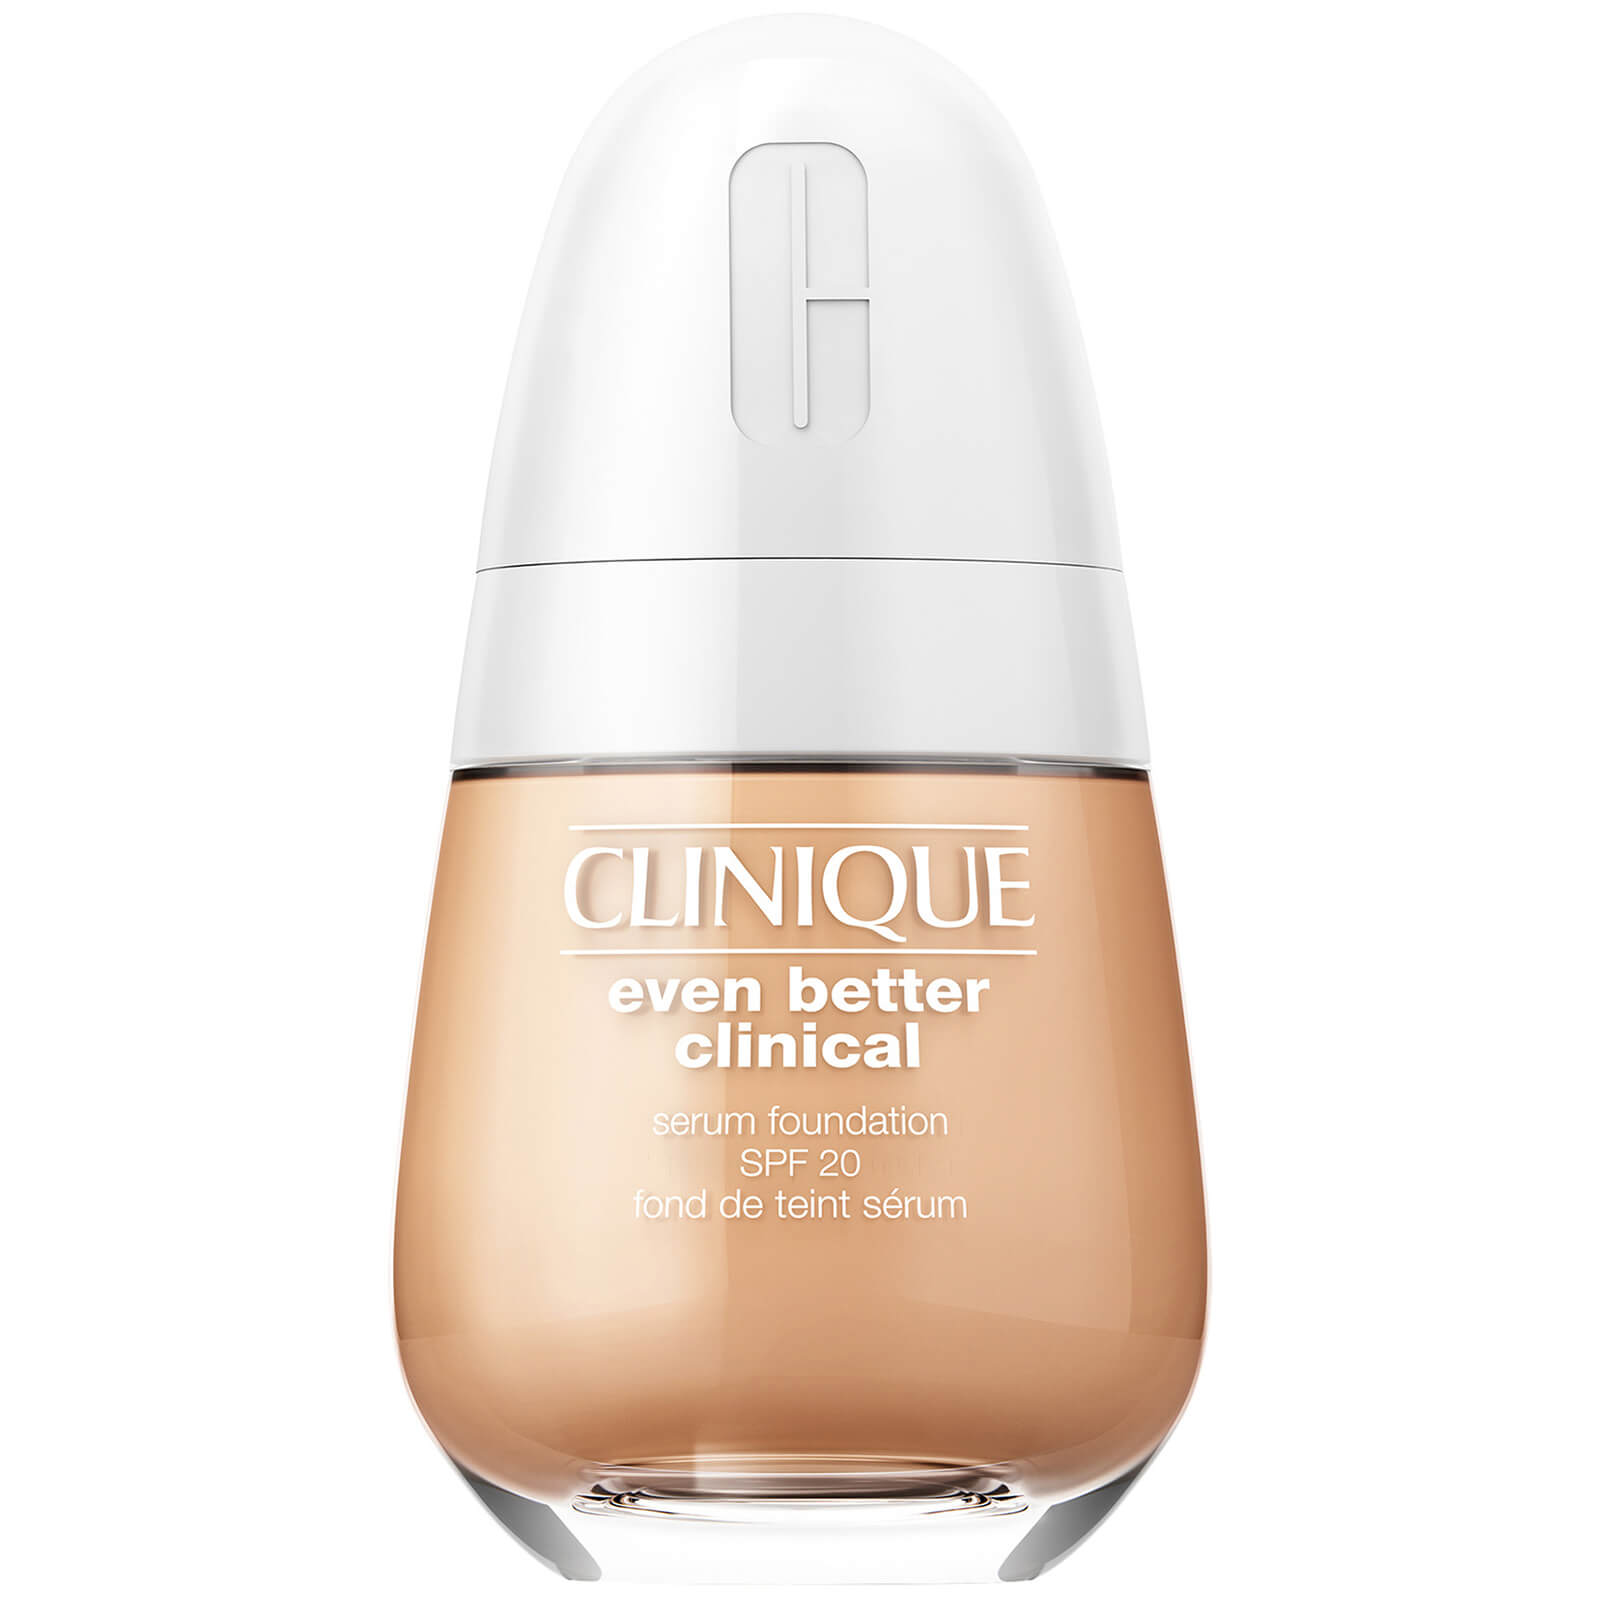 Clinique Even Better Clinical Serum Foundation SPF20 30ml (Various Shades) - Biscuit